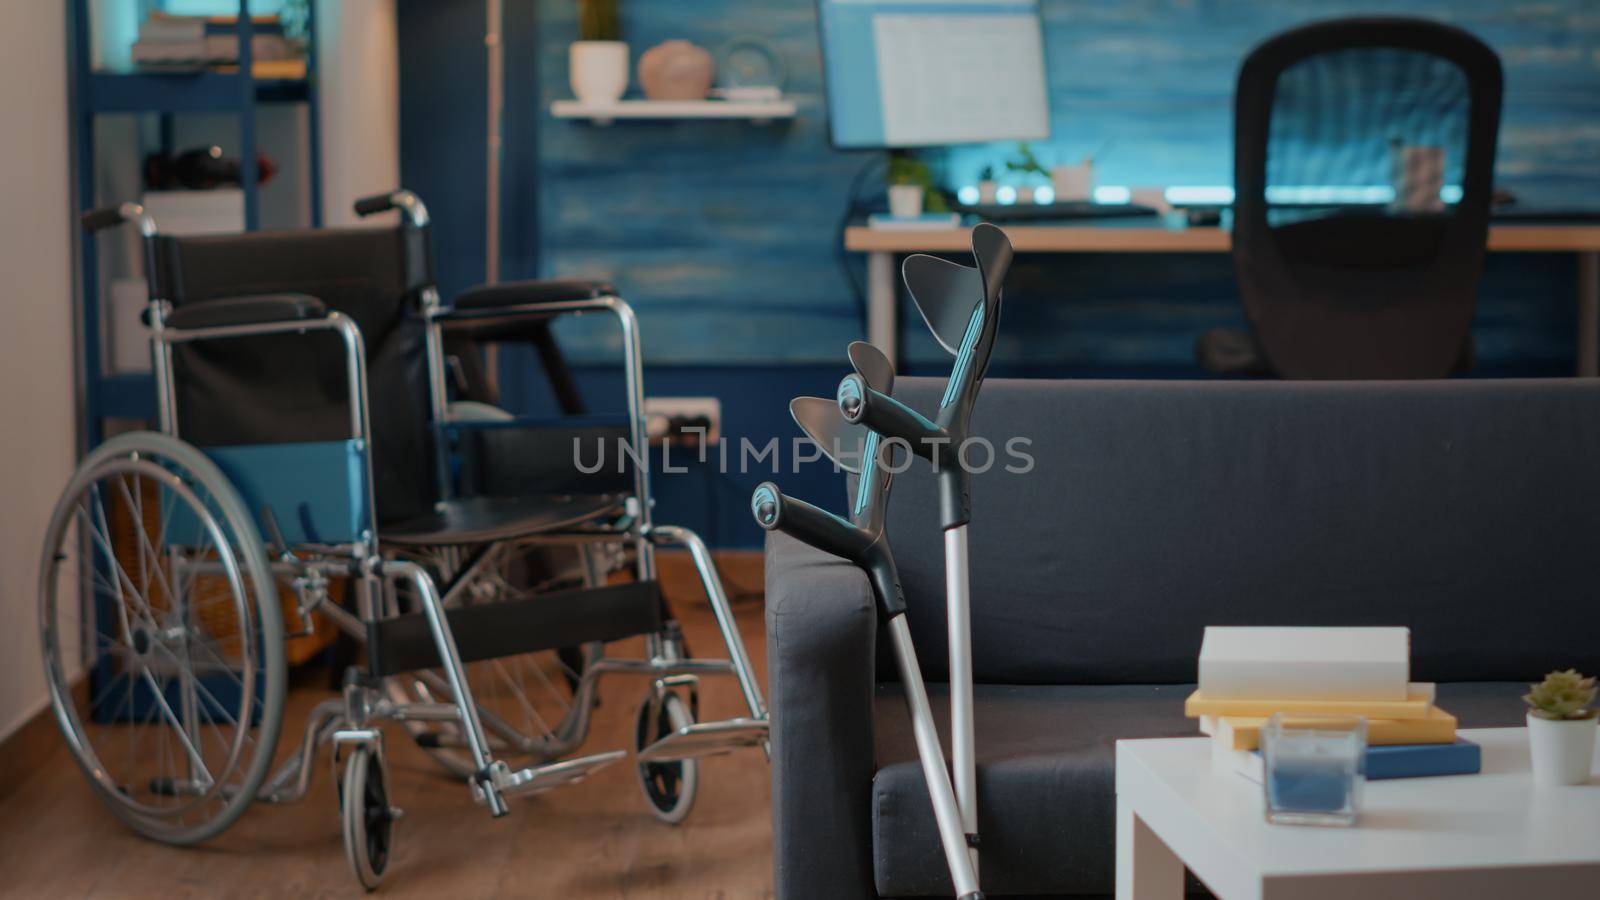 Nobody in living room with wheelchair and crutches to help with transportation by DCStudio